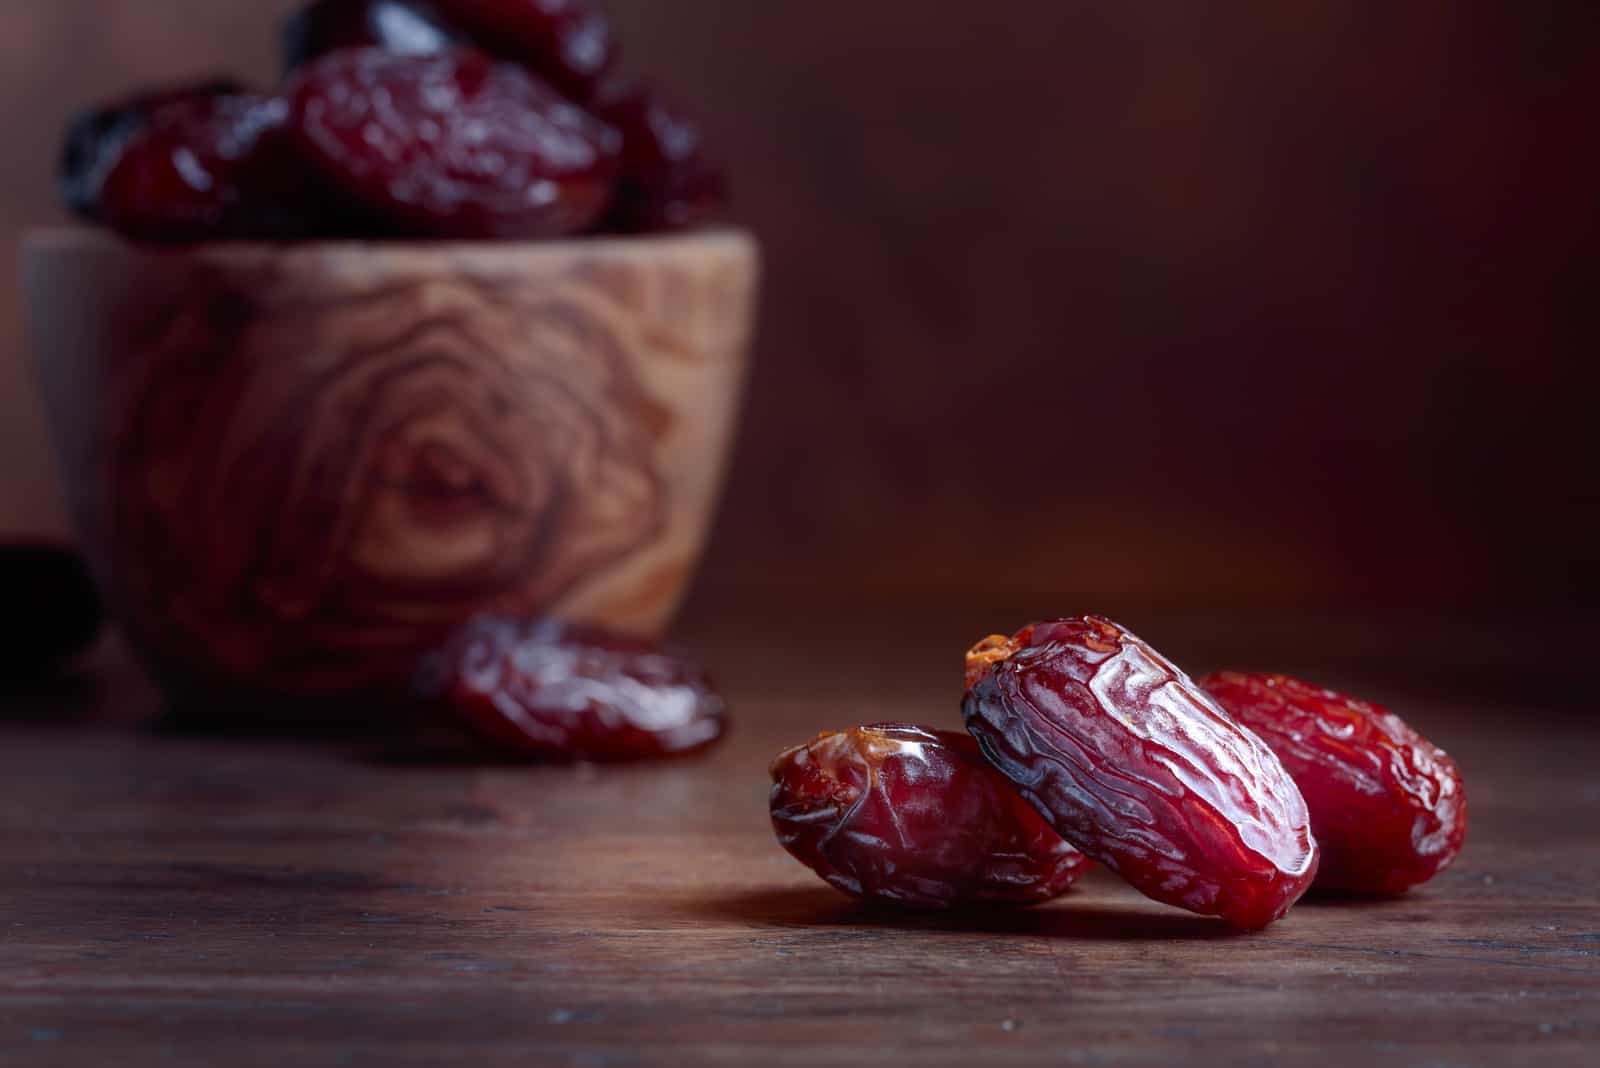 Juicy dates on a old wooden table